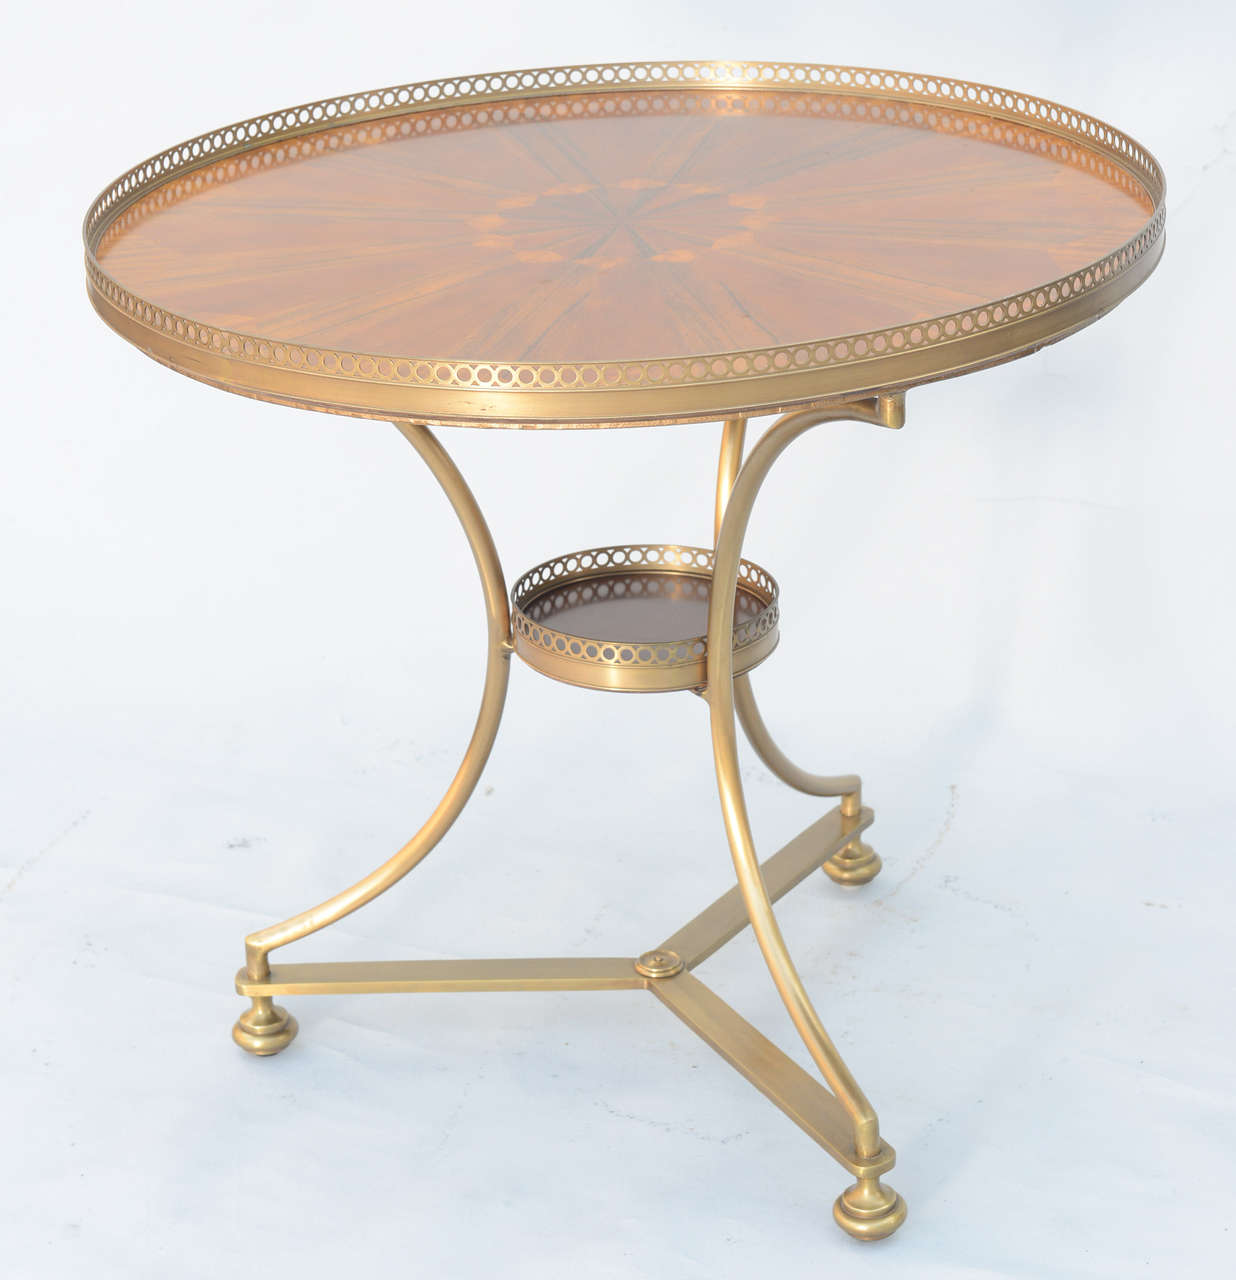 Bouillotte table, having beautifully inlaid top in starburst pattern, pierced gallery, raised on tripartite brass base centered with conforming shelf.

Stock ID: D9223